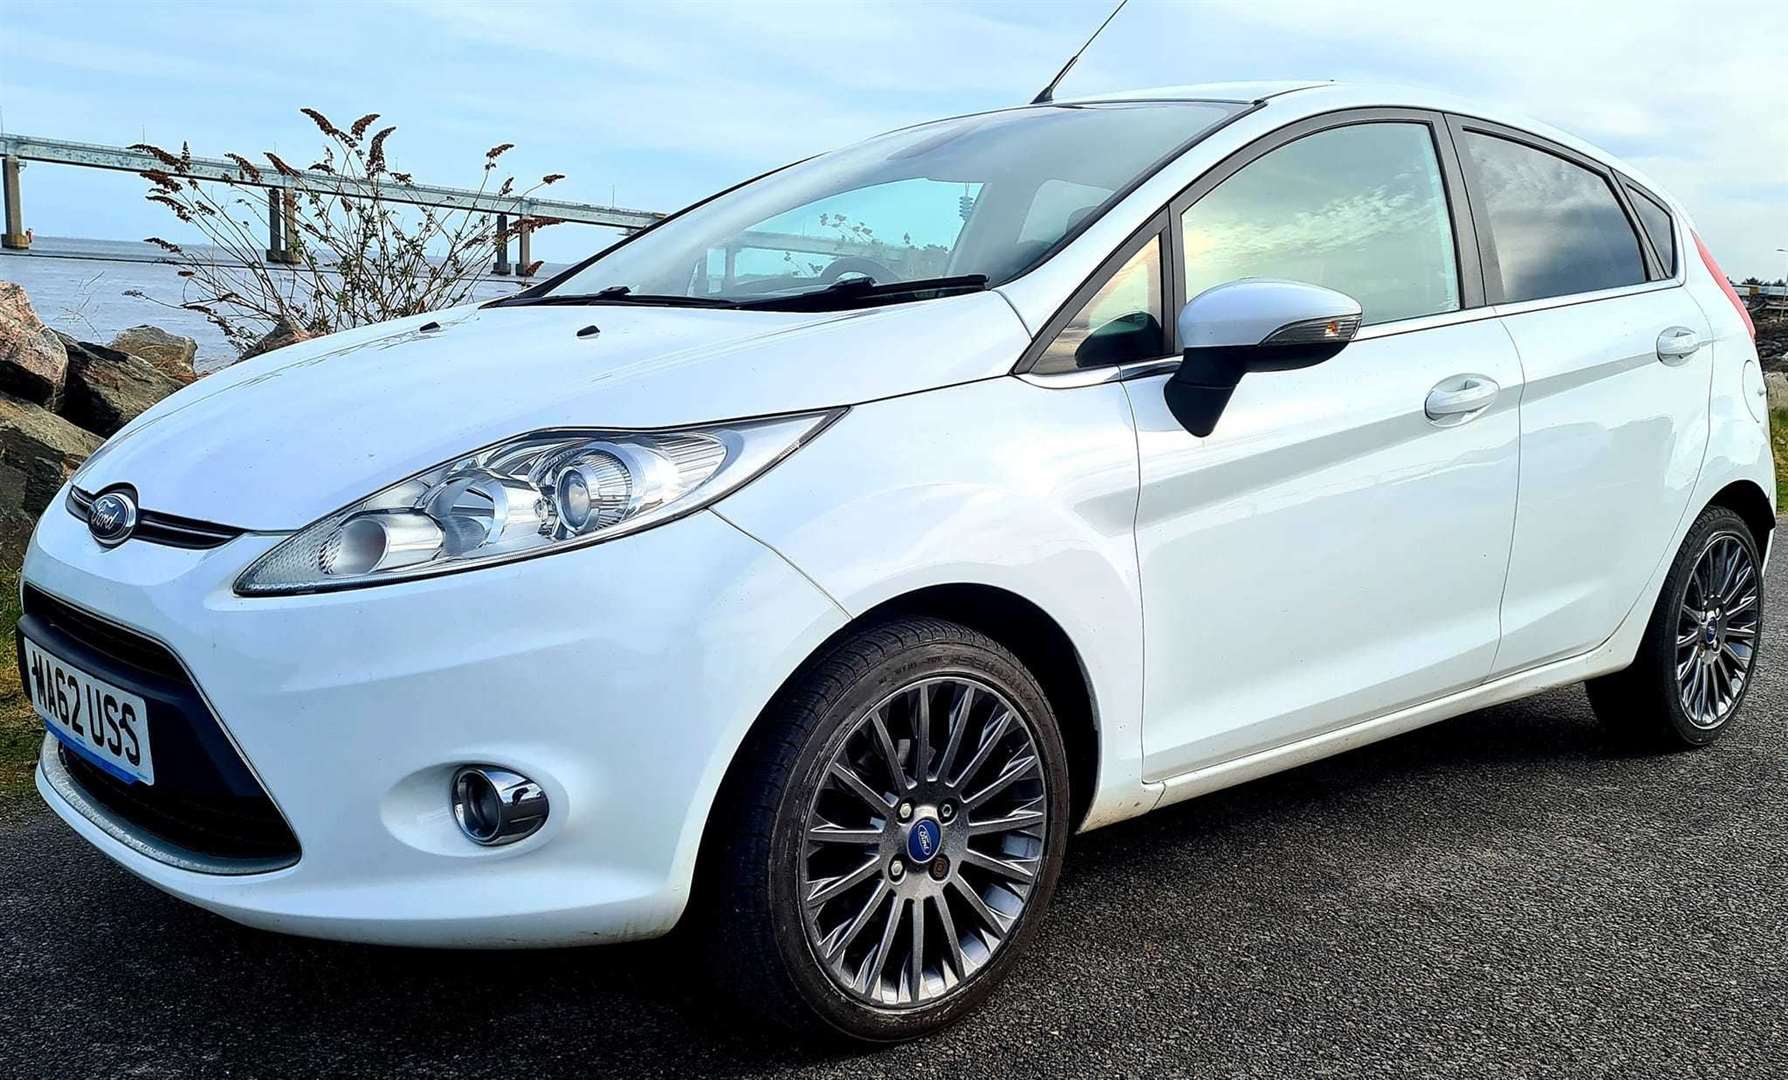 The white Ford Fiesta is believed to have been taken from the premises of valeting company Double Bubble in Inverness.